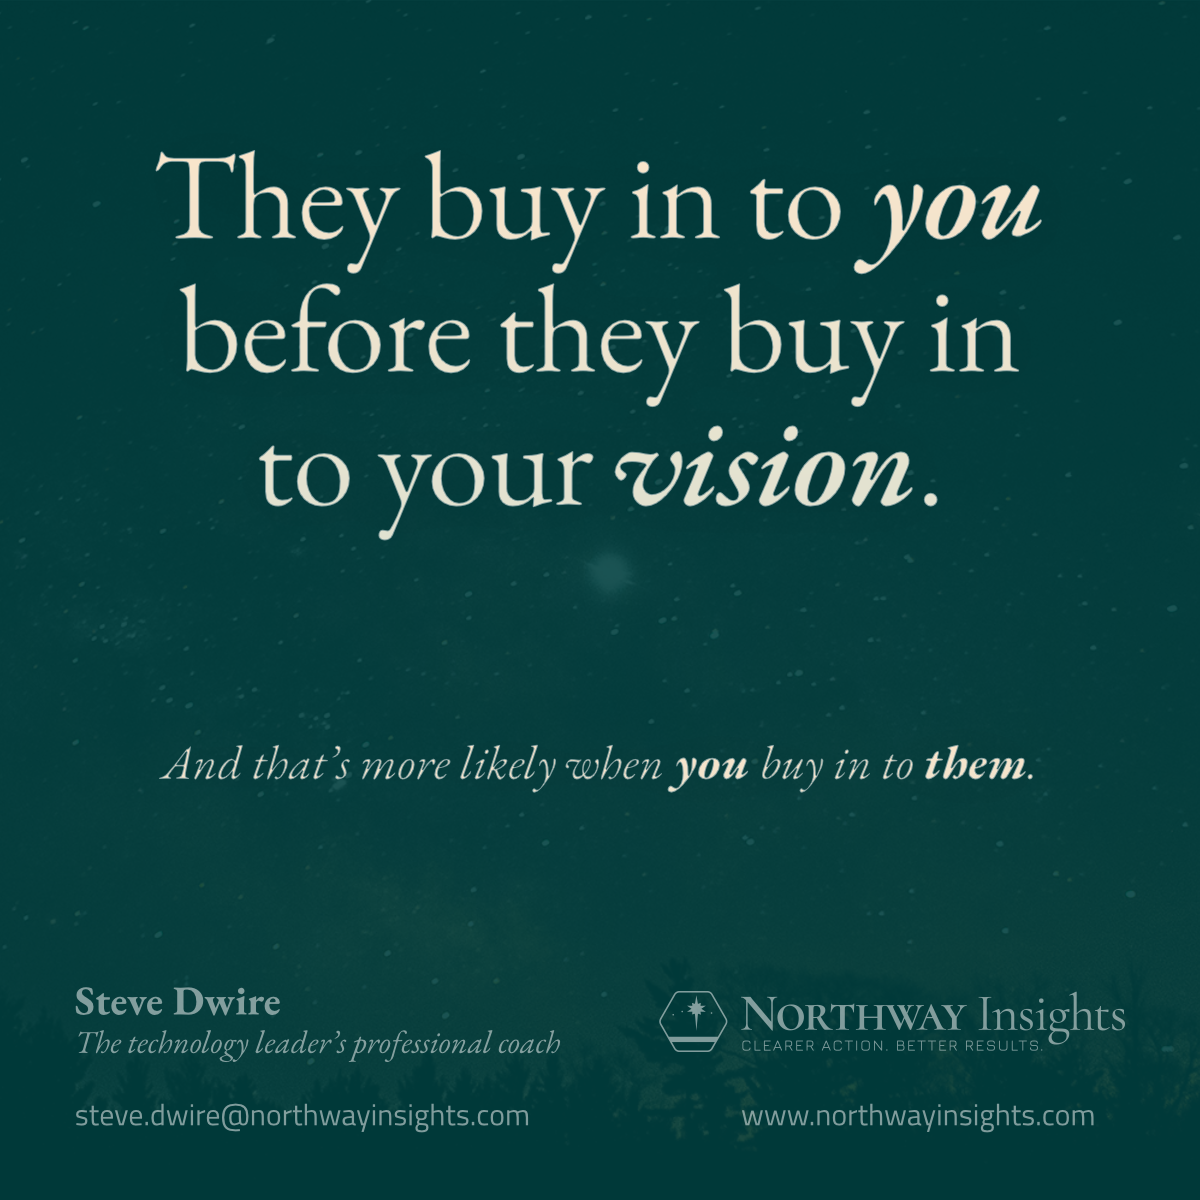 They buy in to you before they buy in to your vision